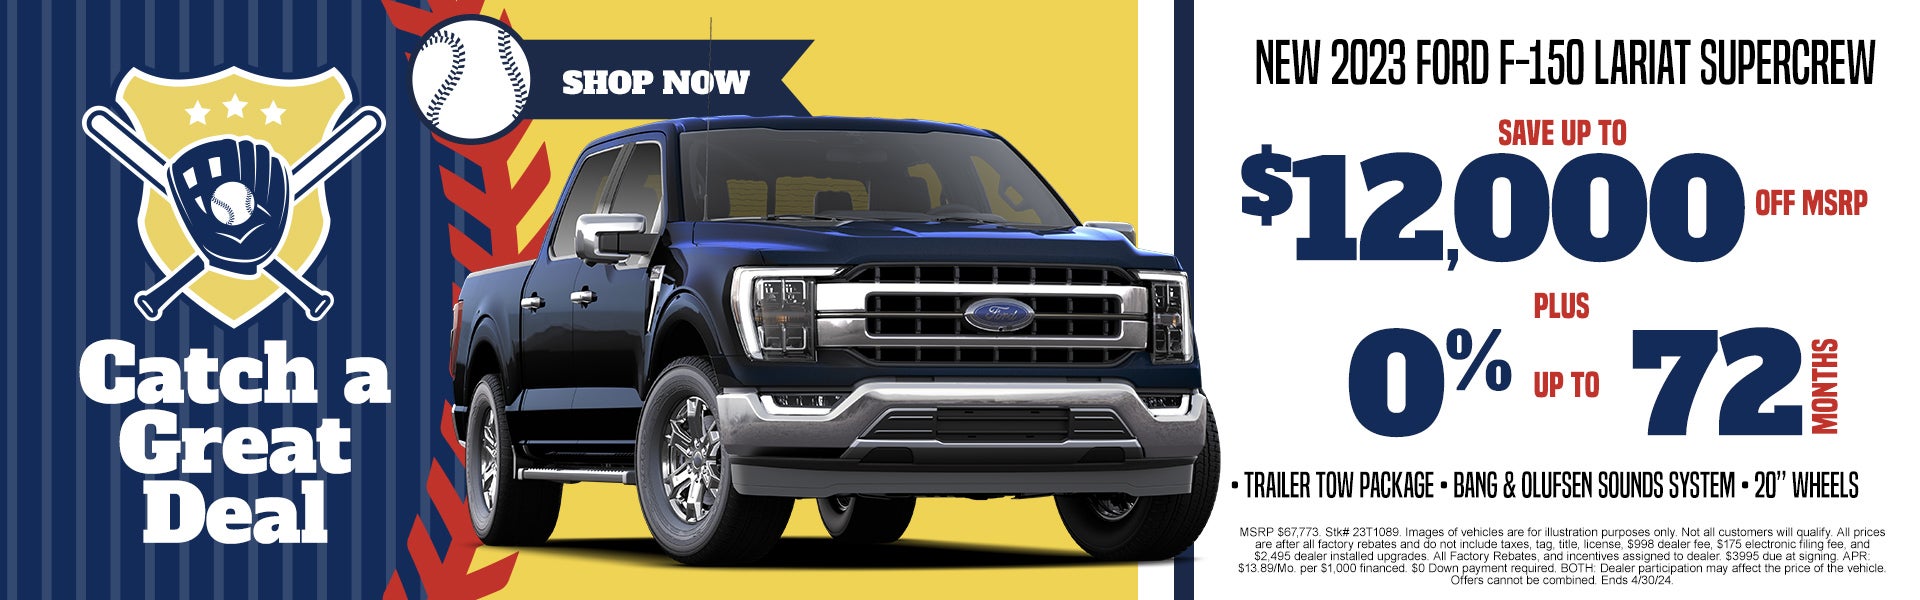 Save up to $12,000 off MSRP PLUS 0% up to 72 Months